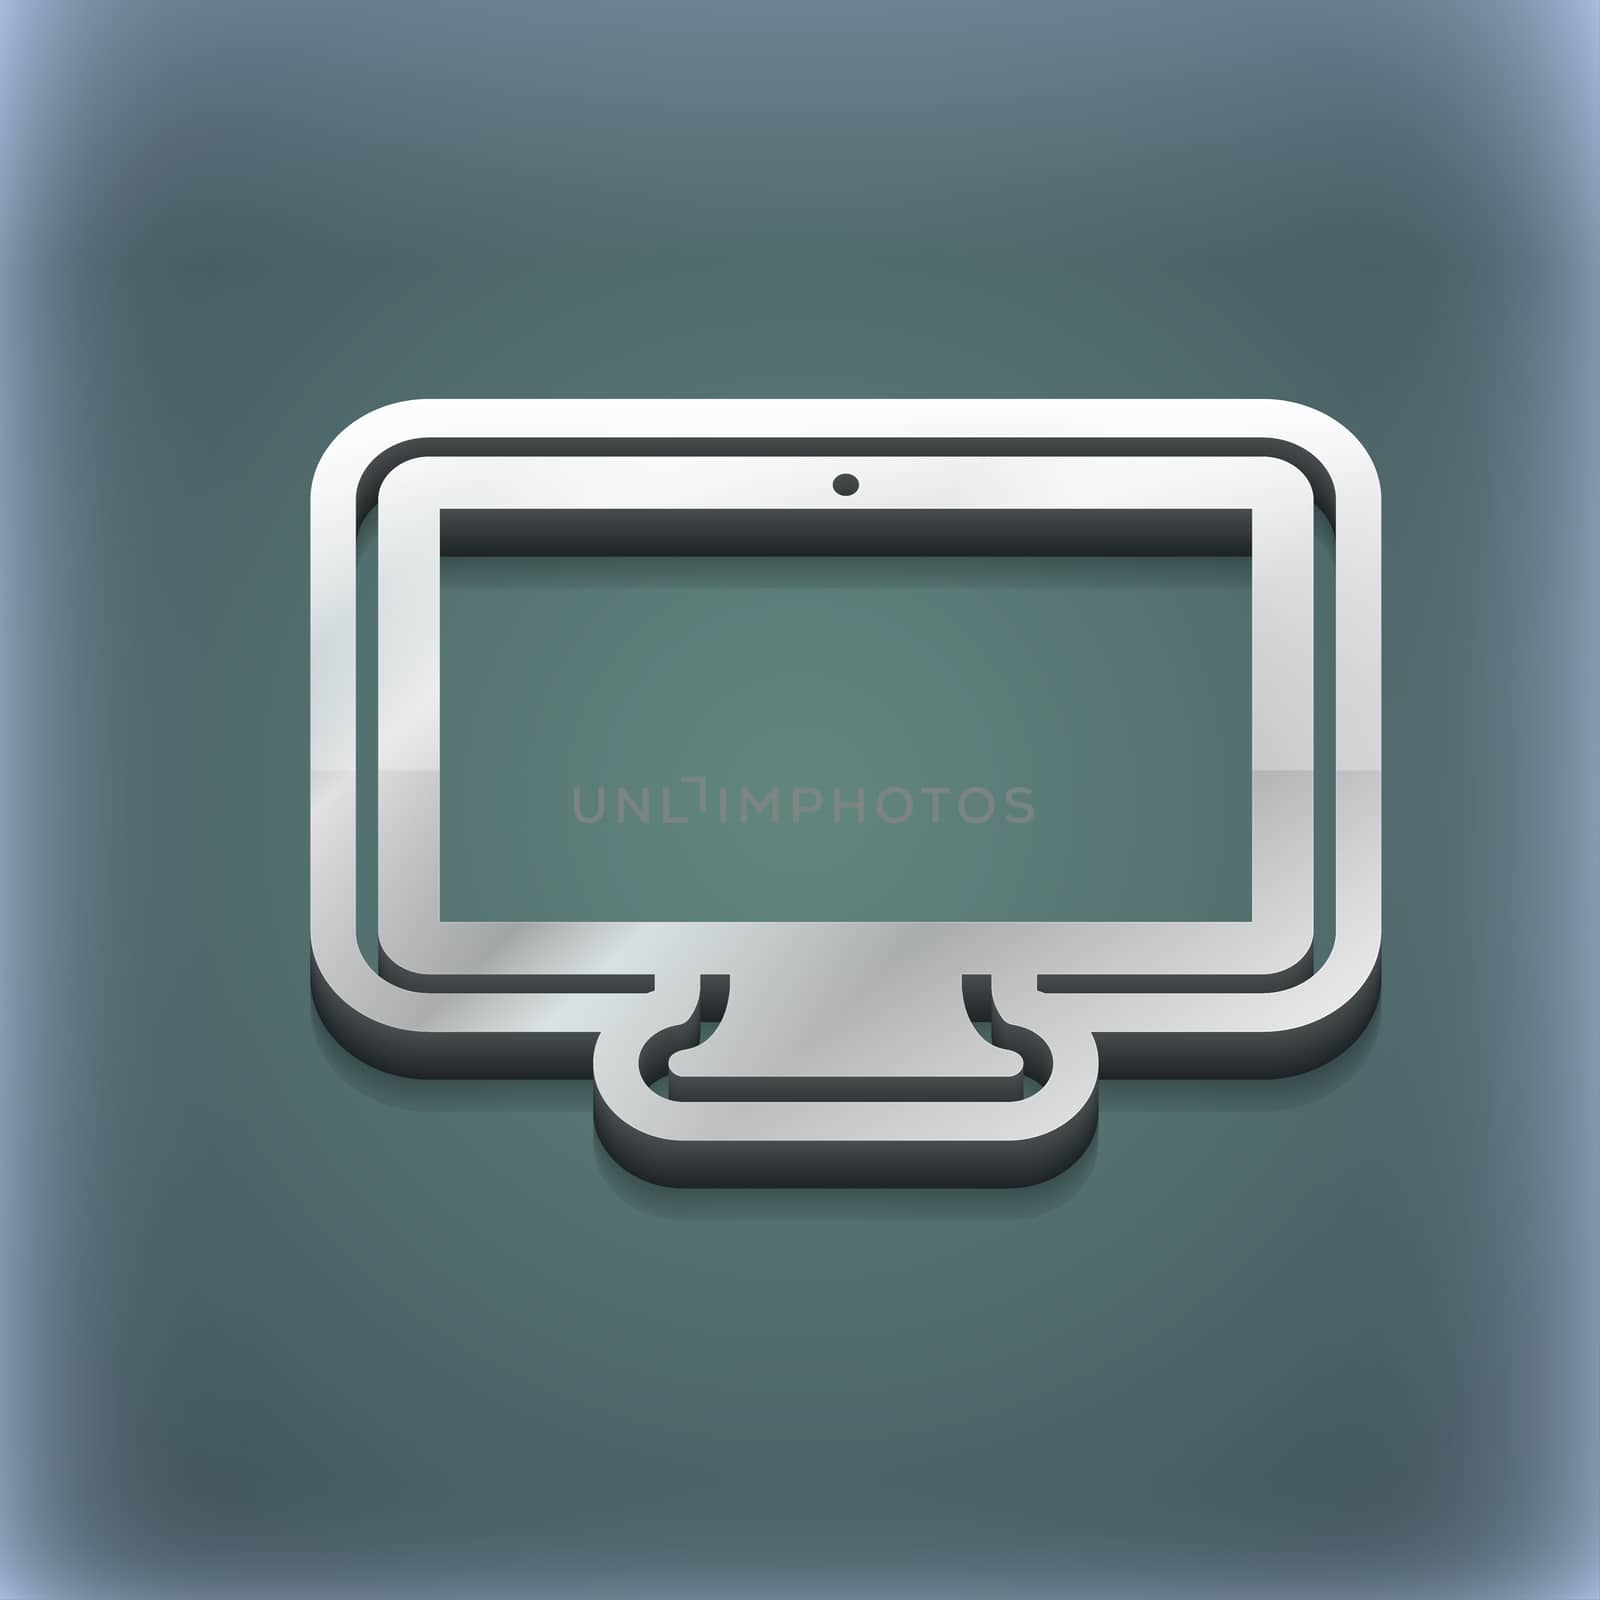 monitor icon symbol. 3D style. Trendy, modern design with space for your text illustration. Raster version